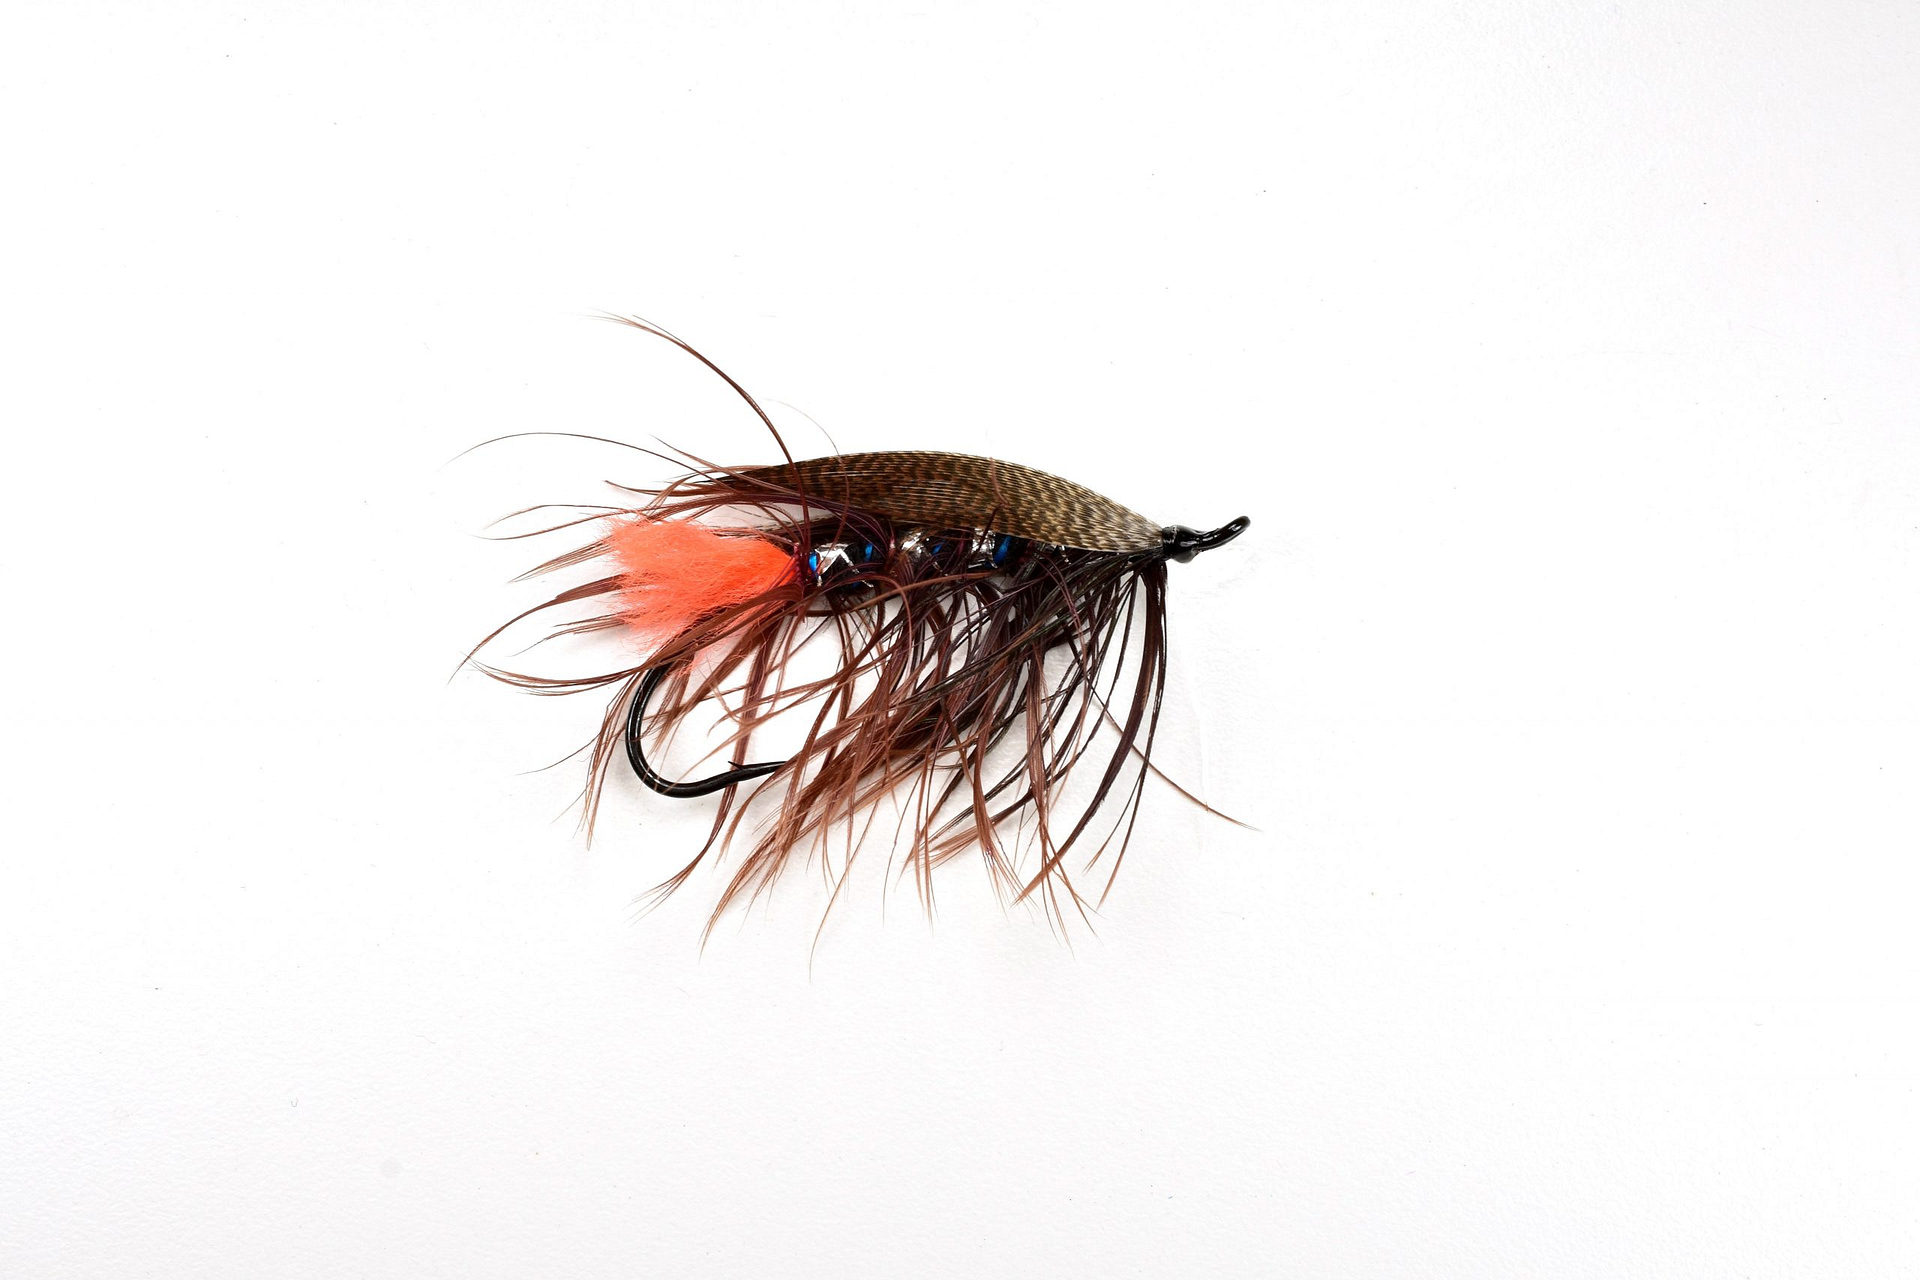 Spey Fly History-Learn about history of Atlantic Salmon Spey Flies